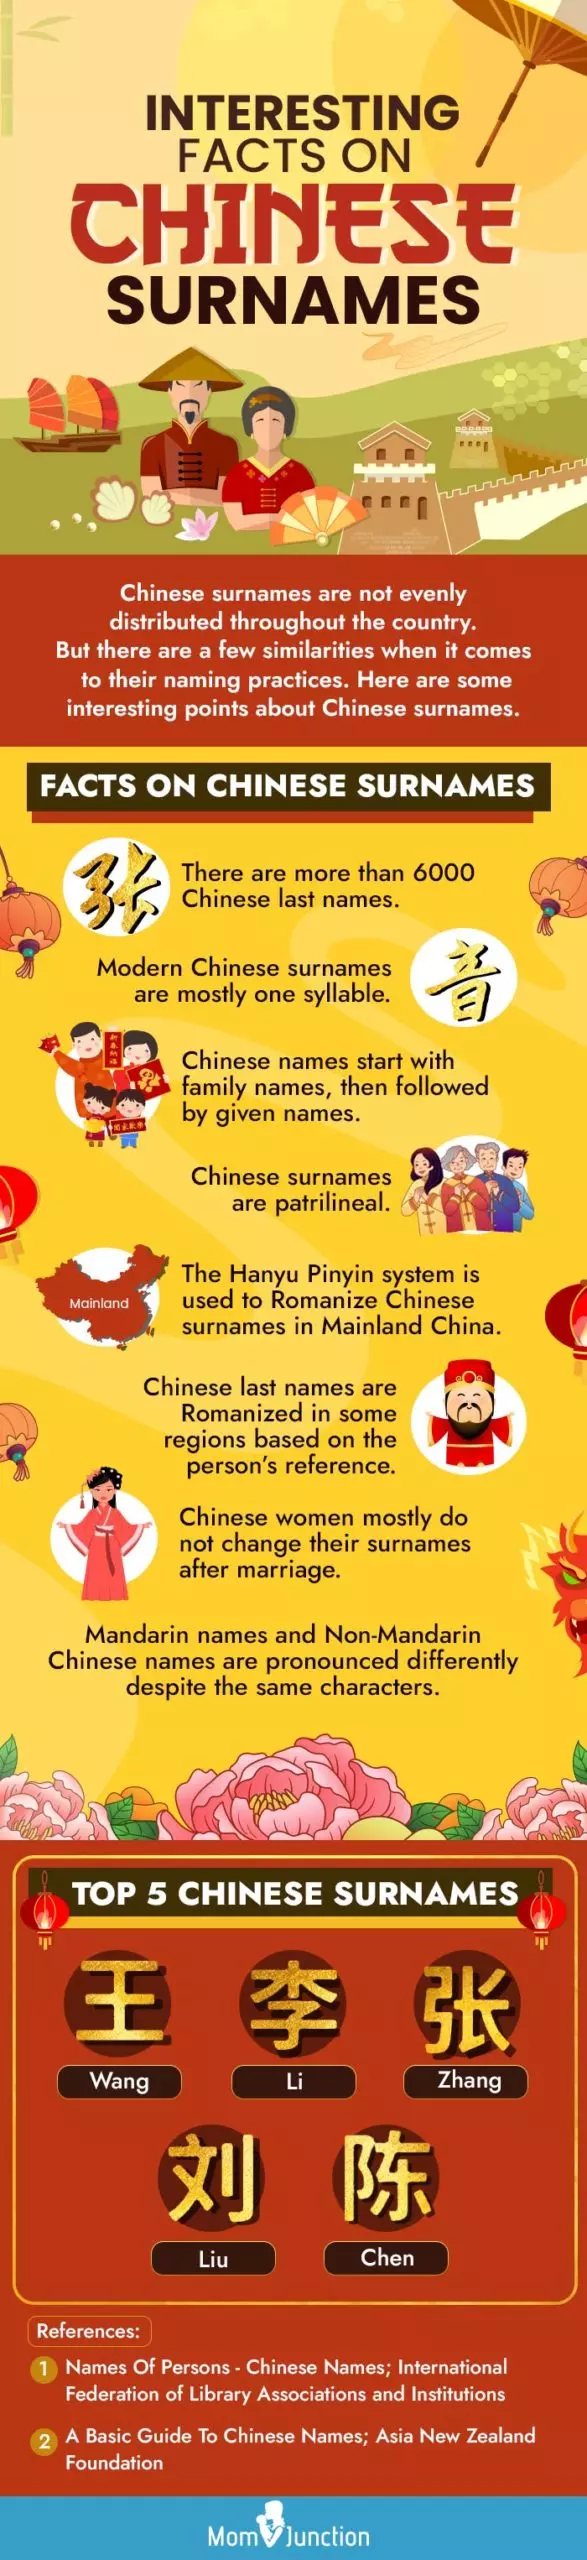 interesting facts on chinese surnames (infographic)